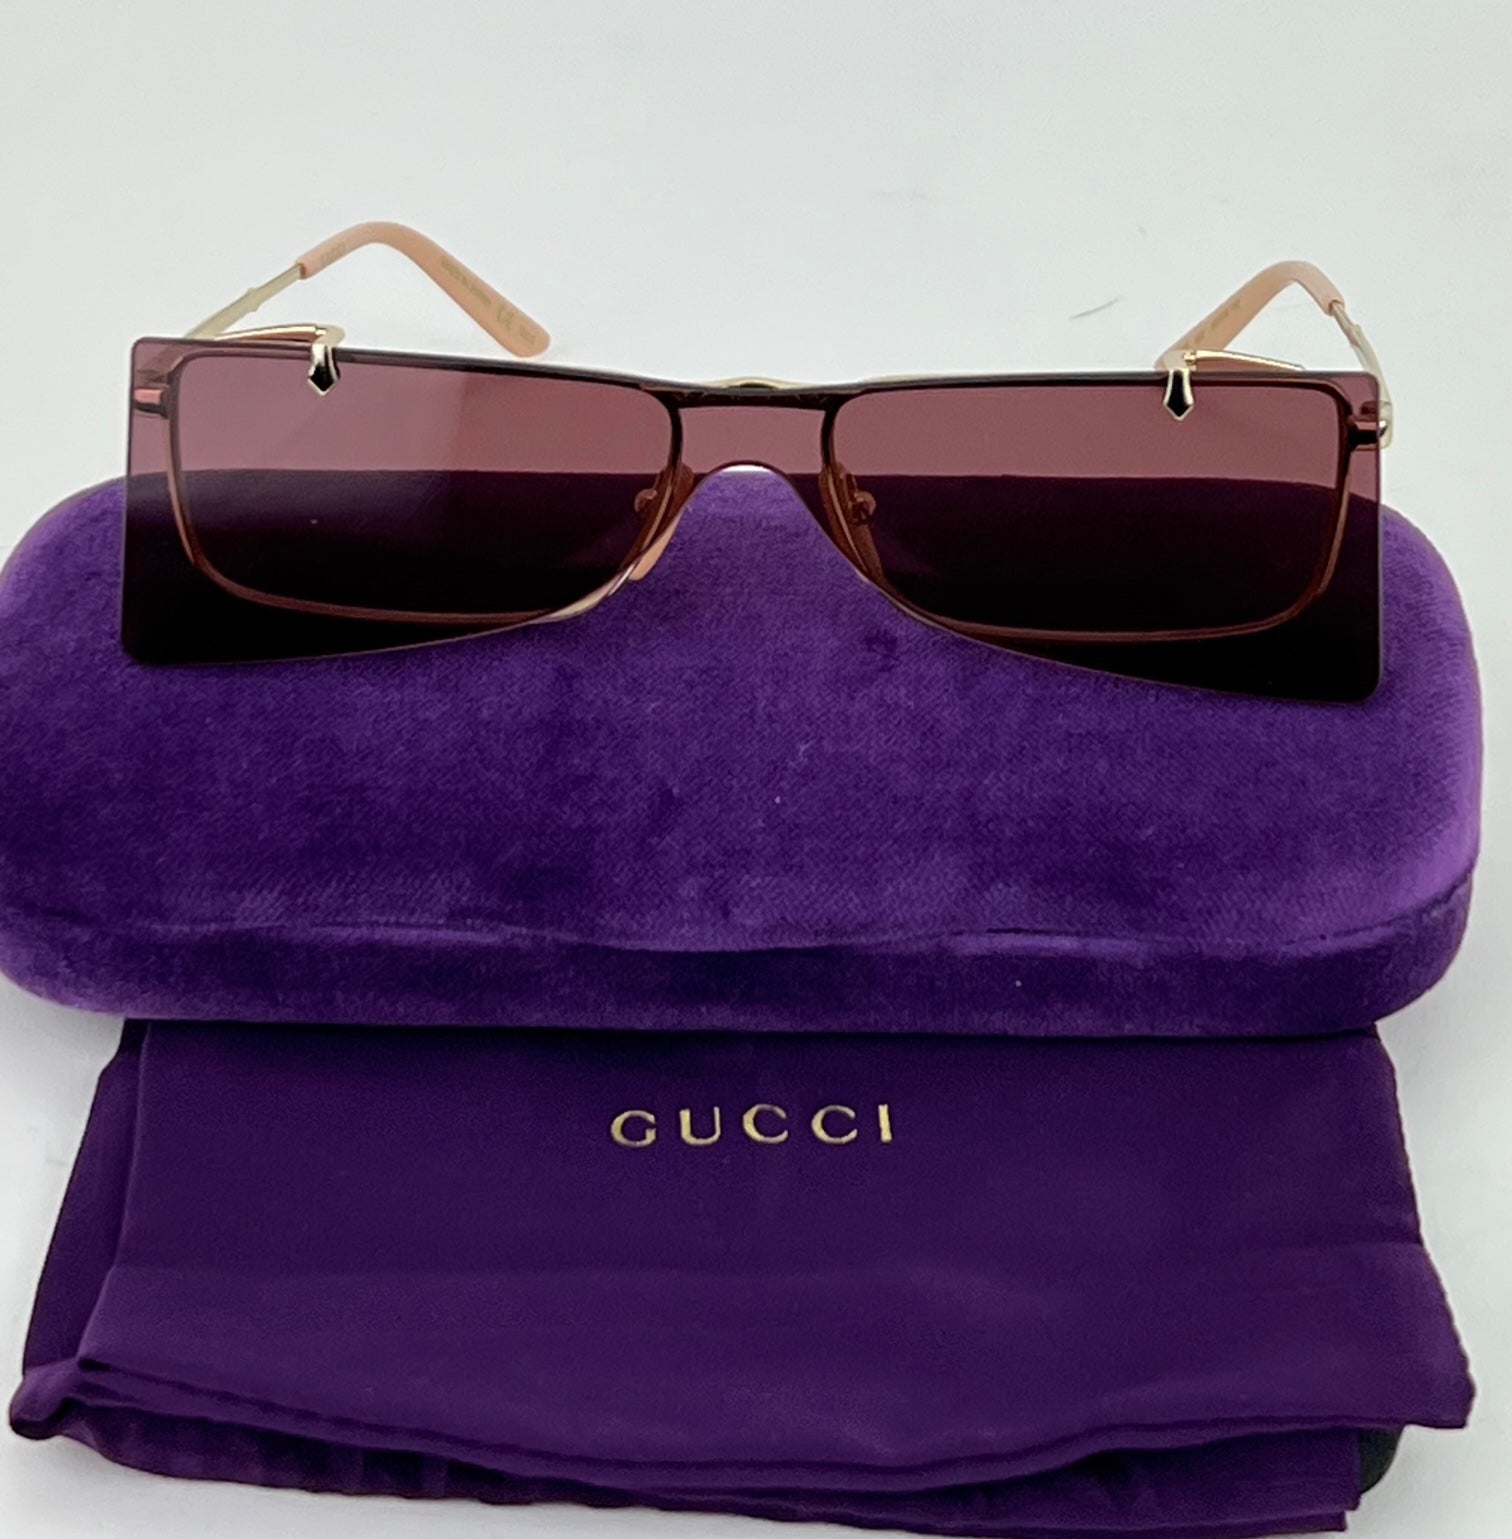 Gucci Flip-Up Sunglasses Rectangle Red Gold frames GG0363S 002 56 preowned